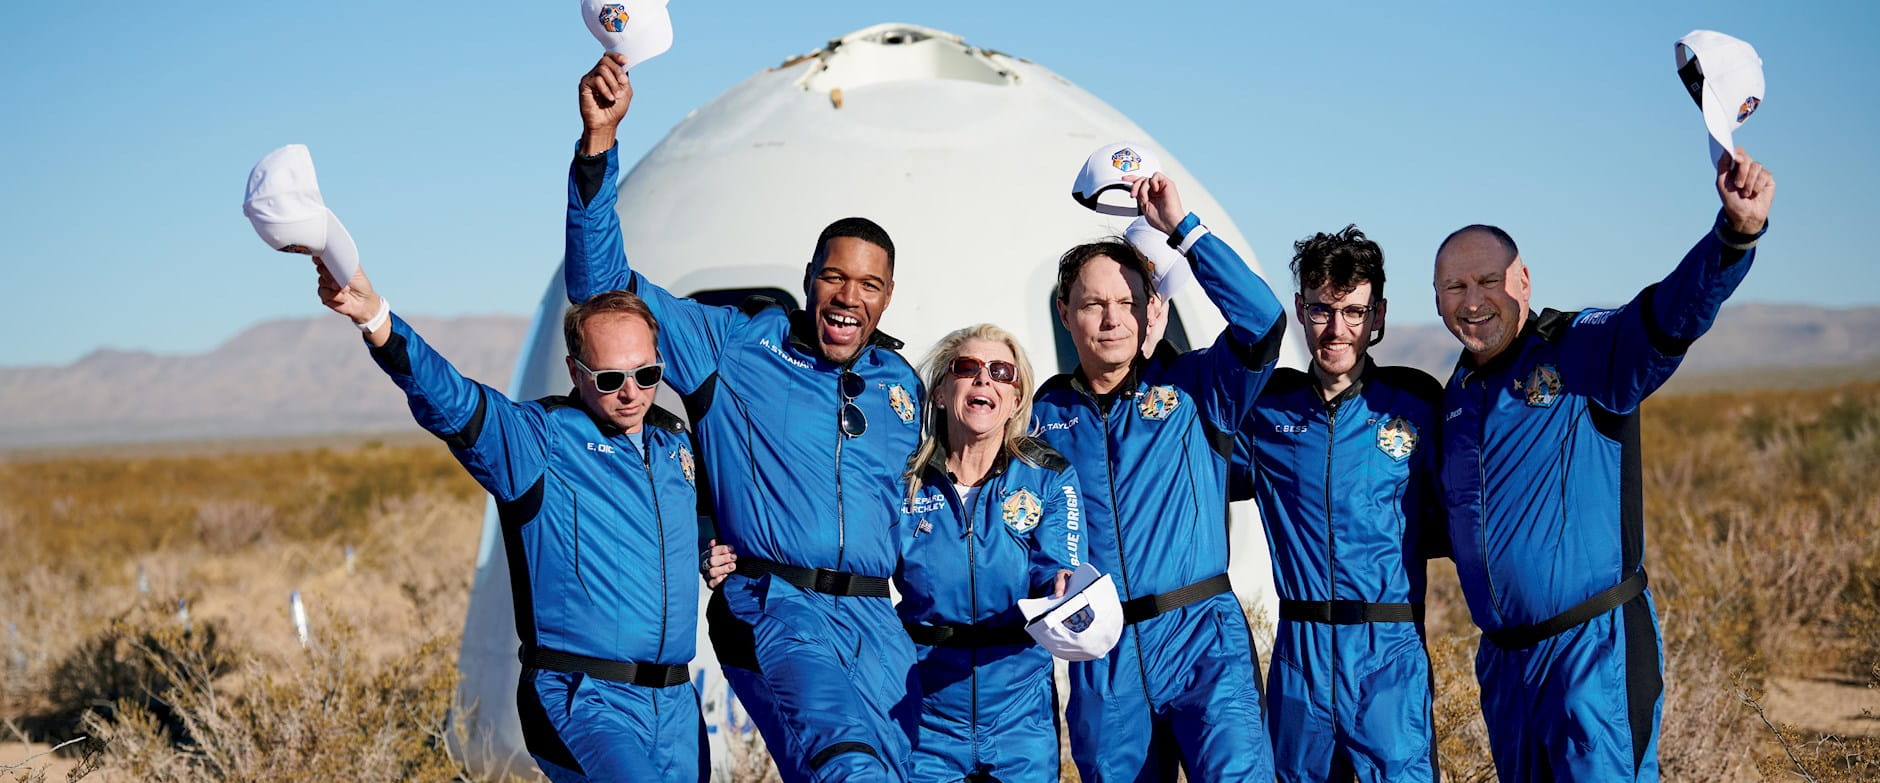 Six people in blue uniforms standing in front of a space vehicle